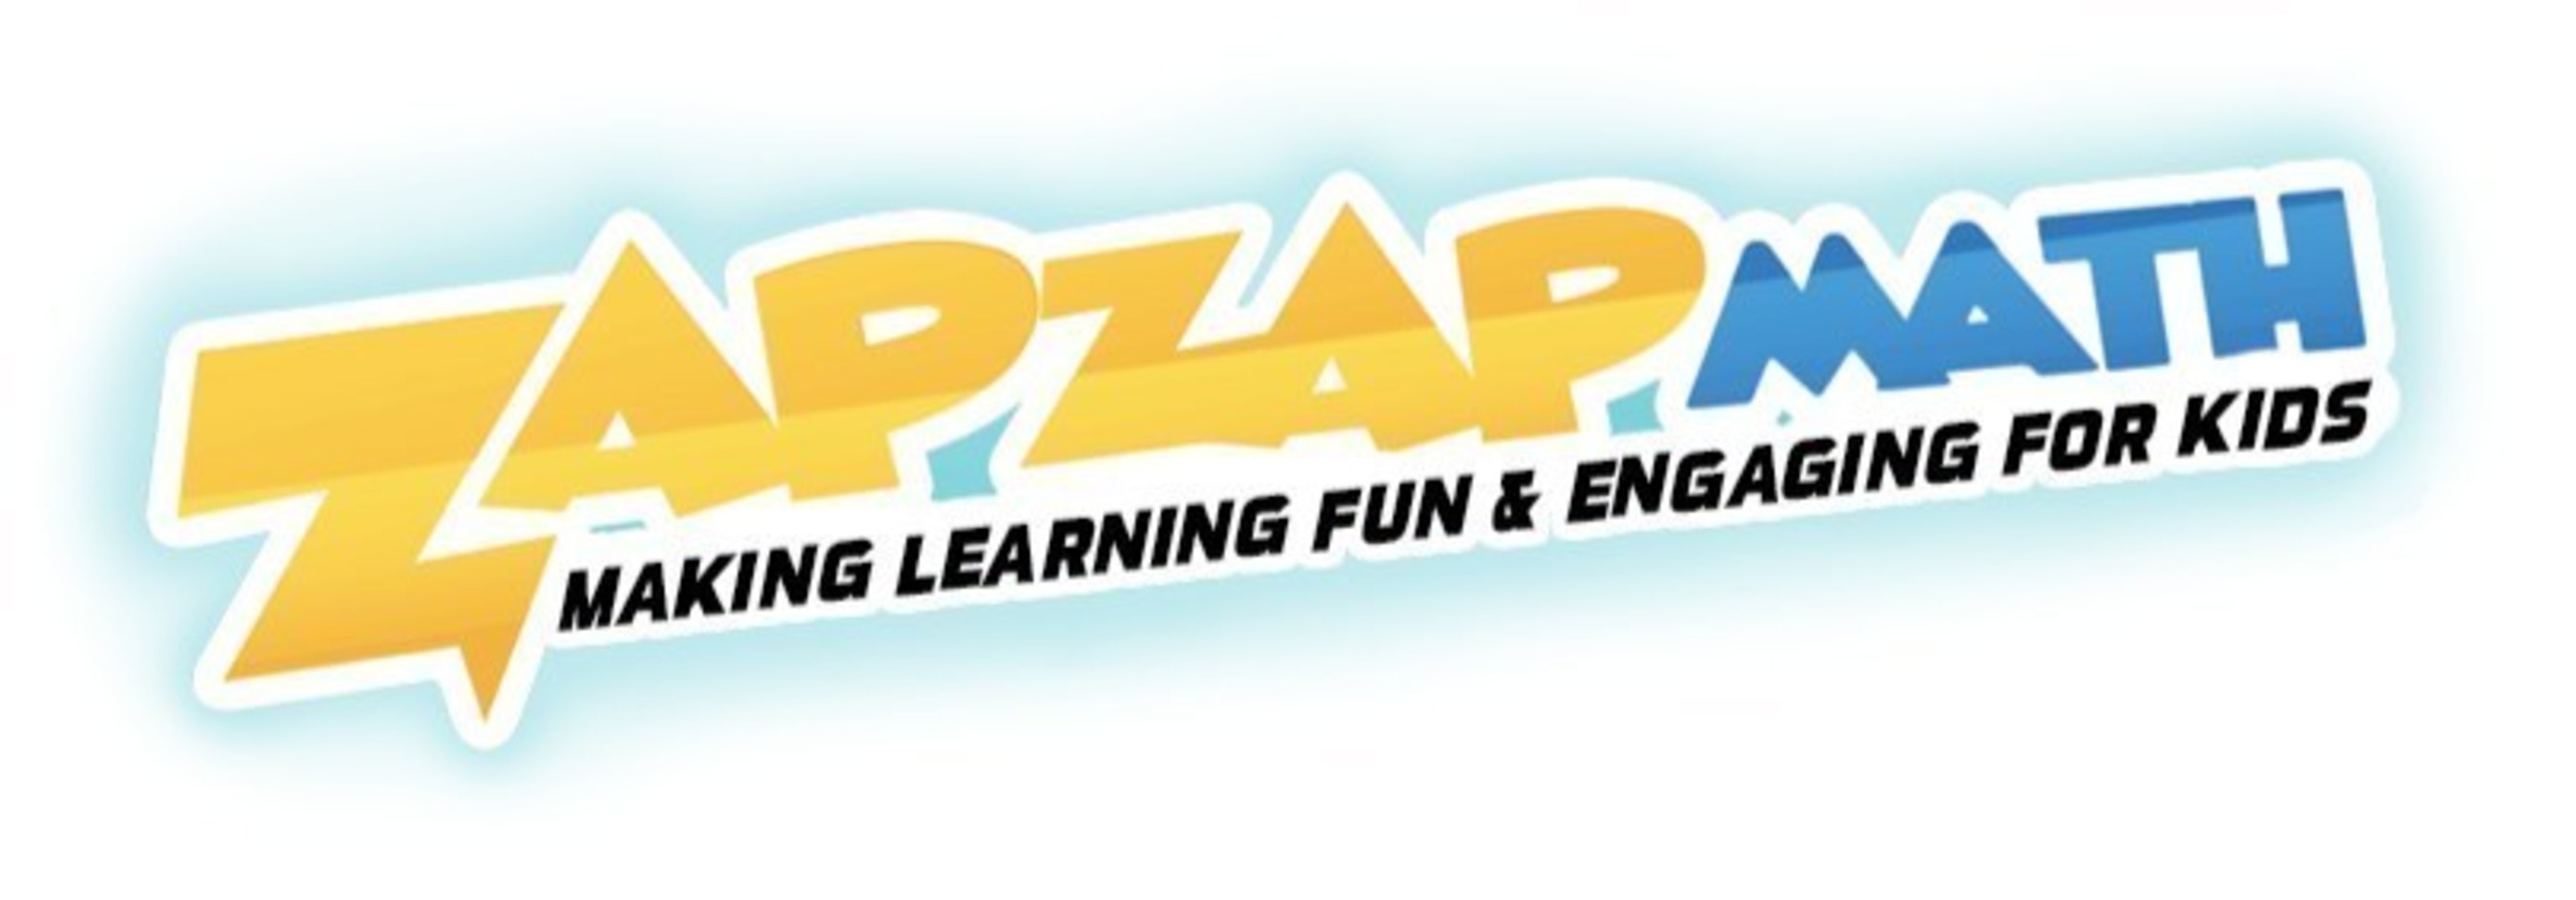 Zap Zap Math, a fun and engaging gamified math platform for students in grades K-6